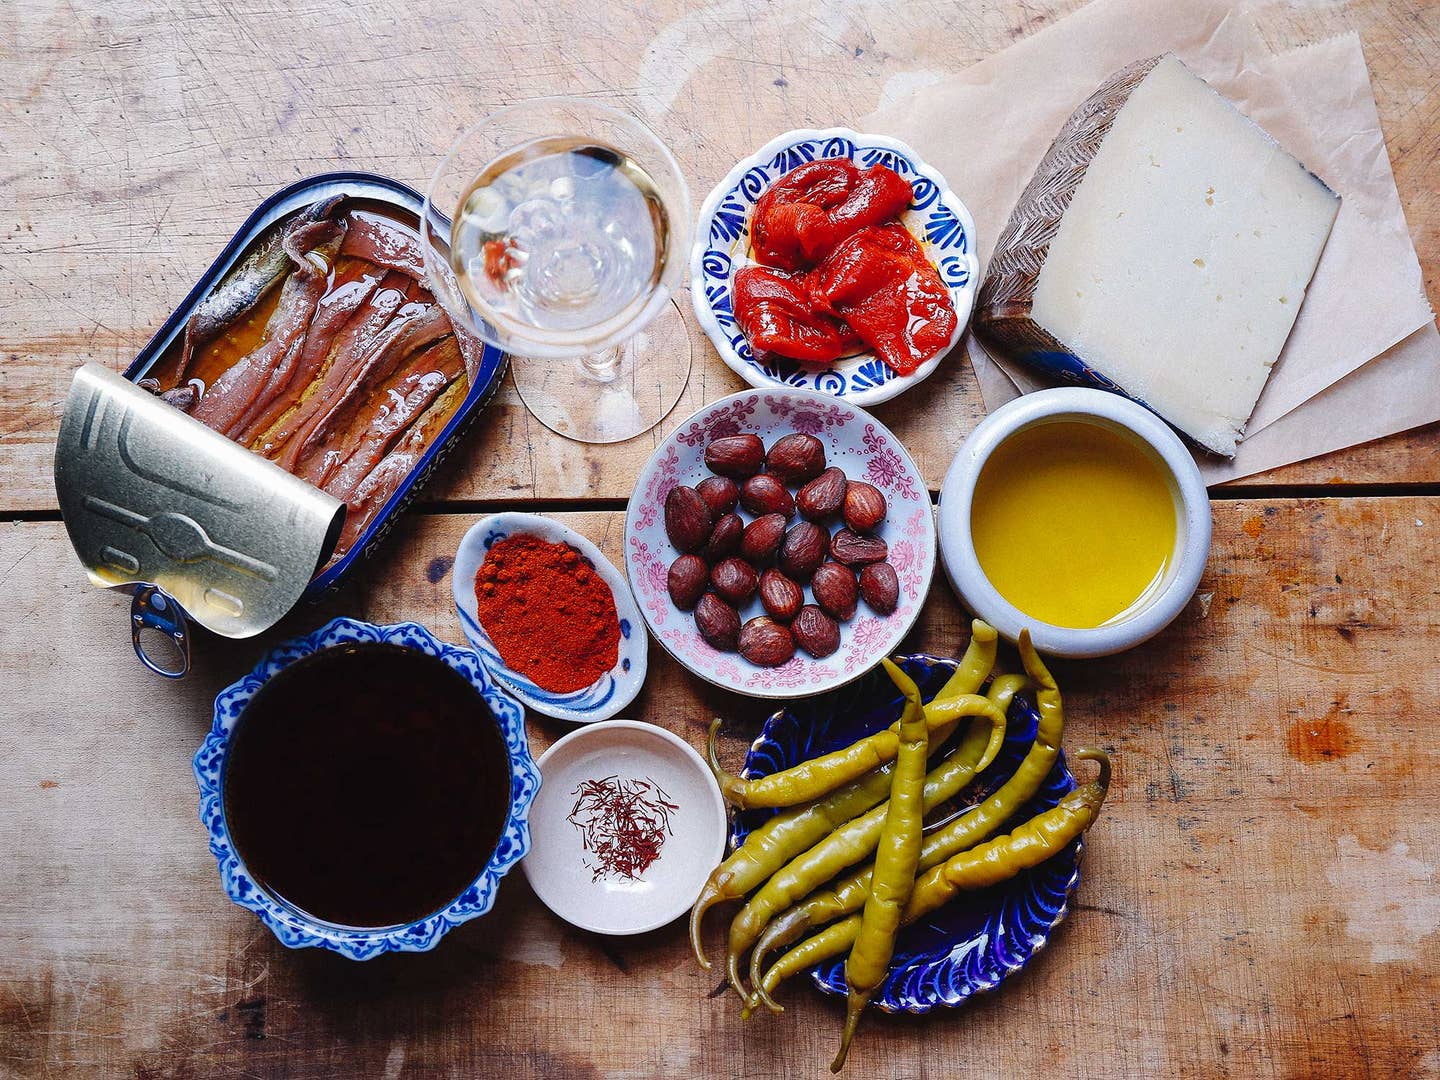 10 Essential Spanish Ingredients for Your Modern Spanish Pantry